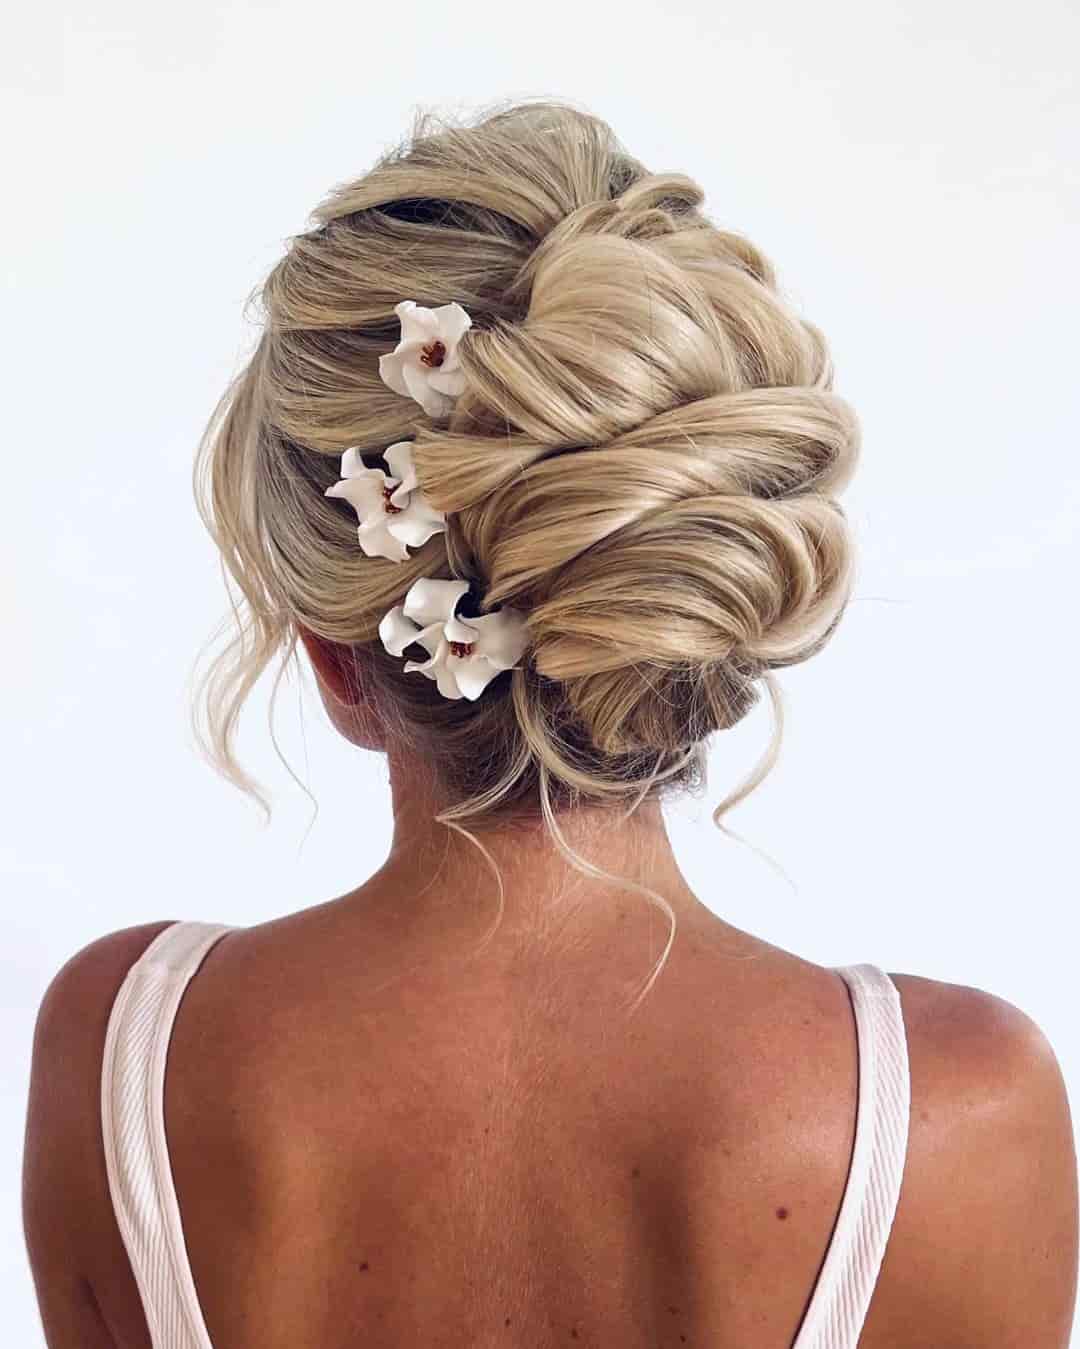 Messy Interwoven Updo with Flower Pins